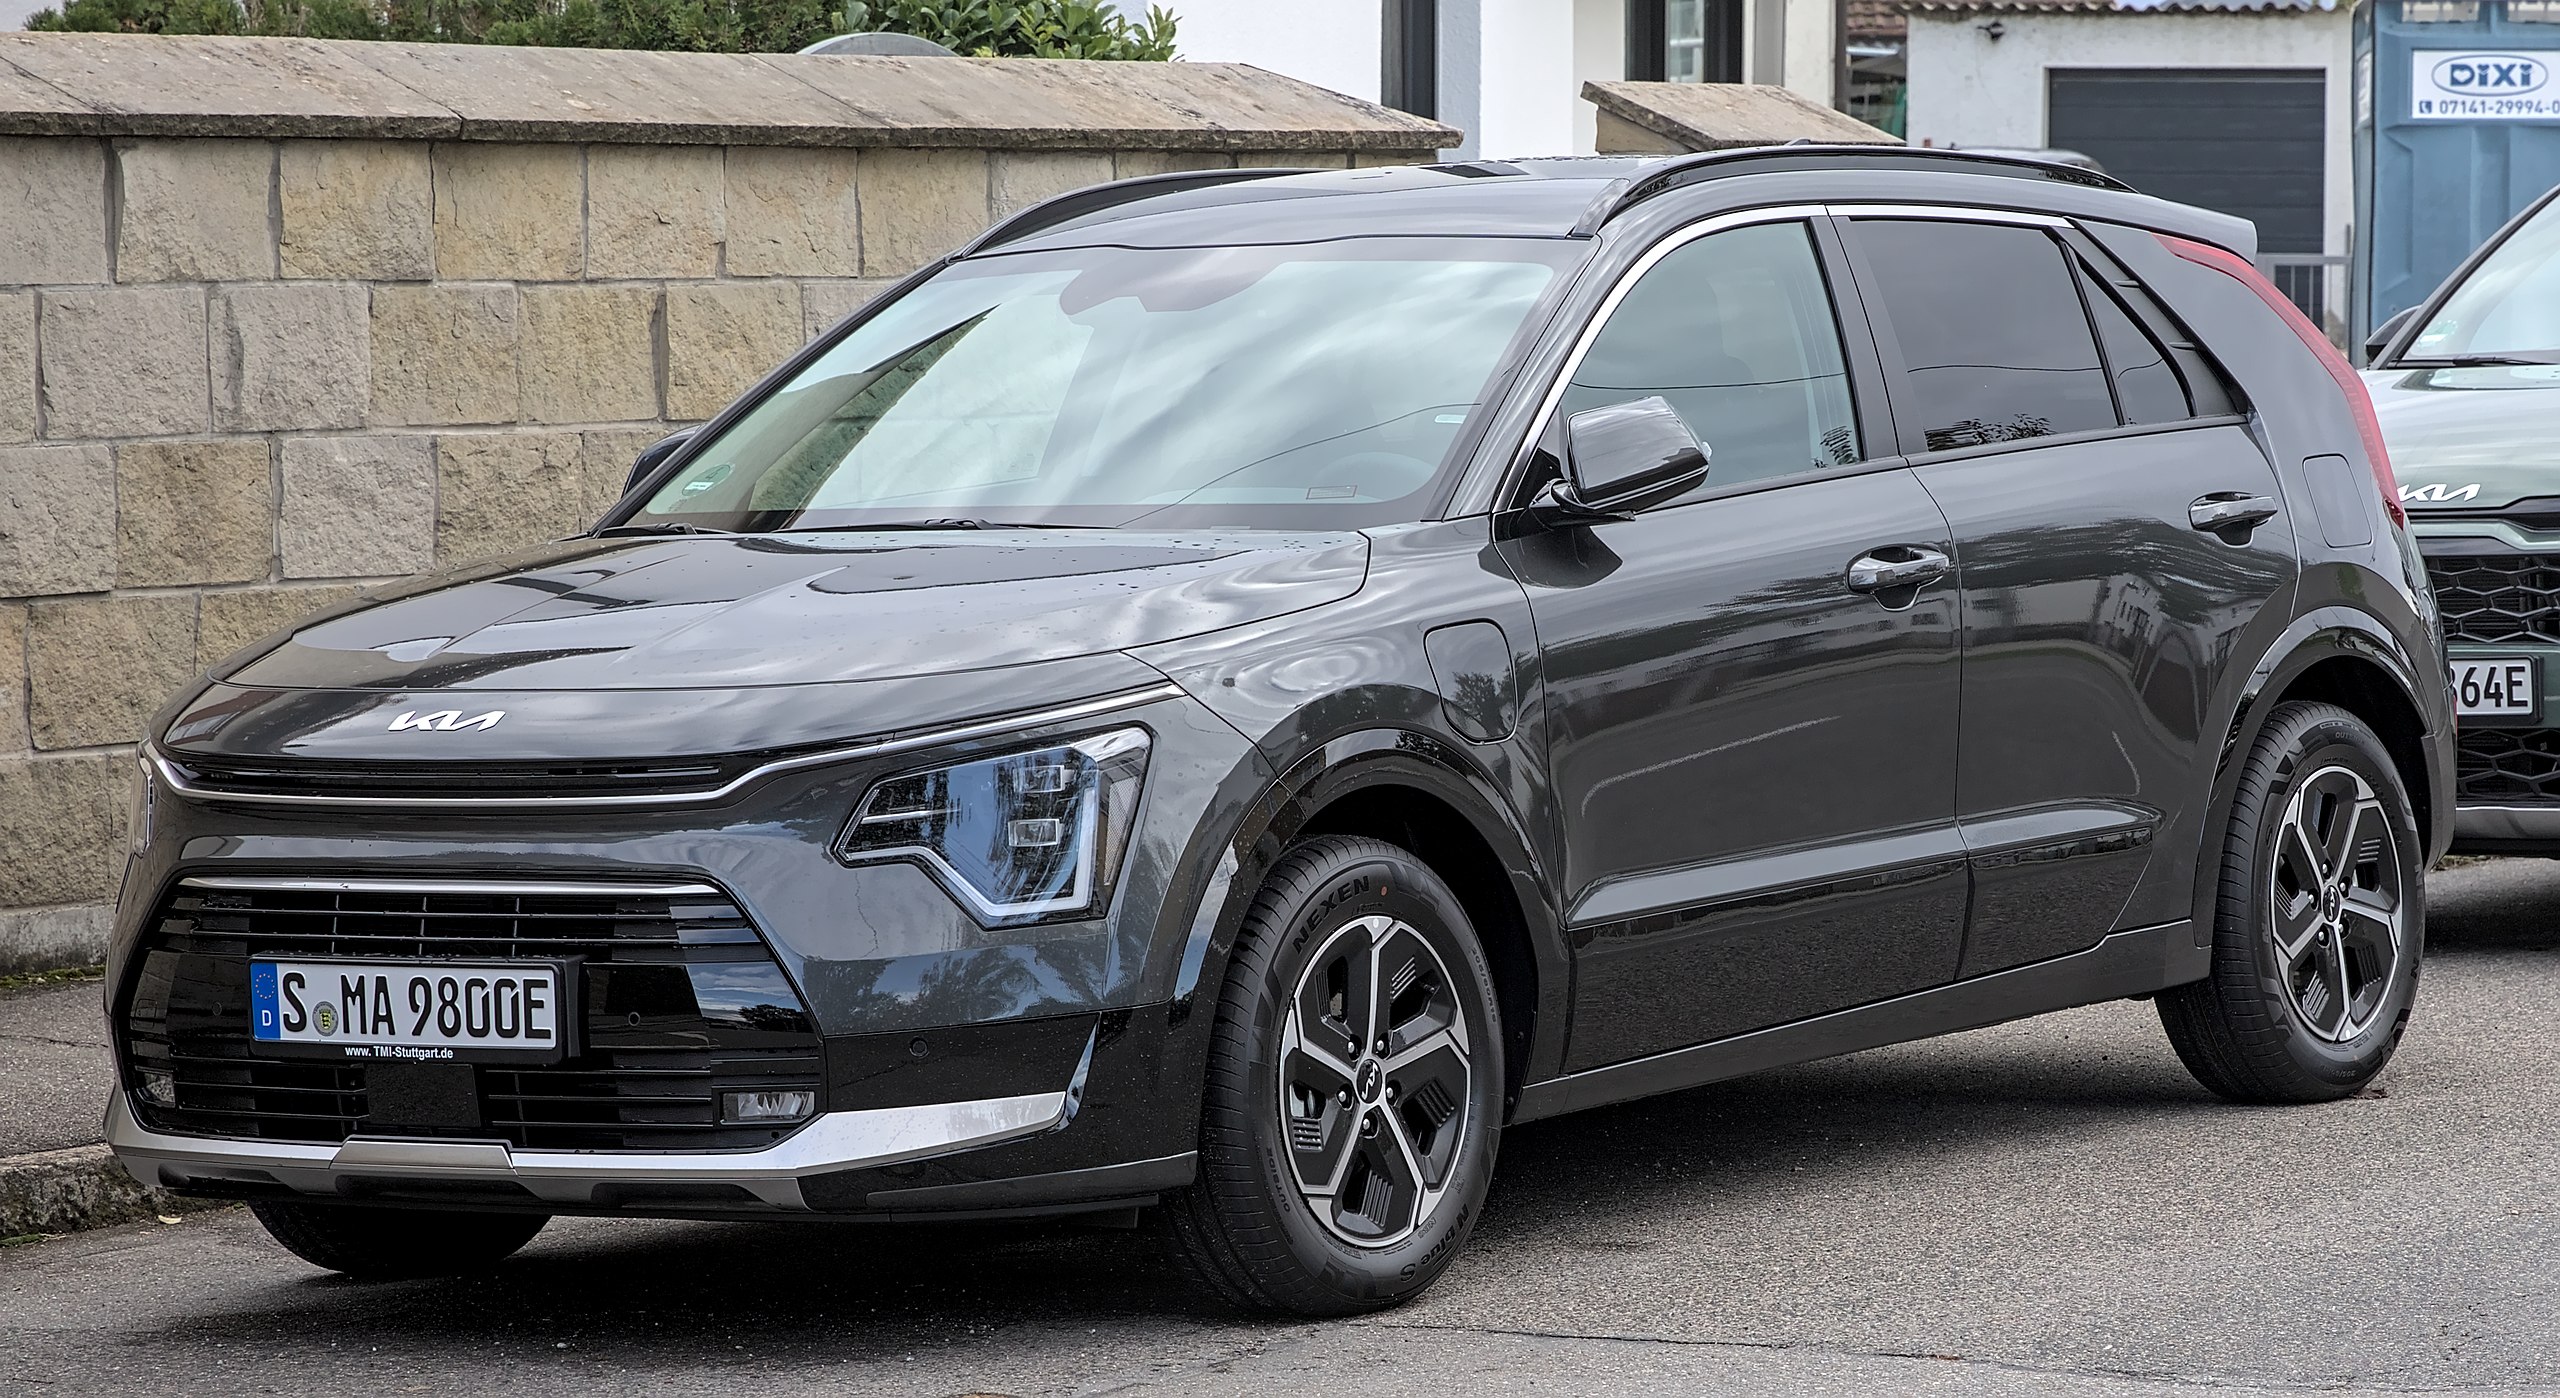 In Russia, they began to take orders for an economical second-generation Kia Niro crossover